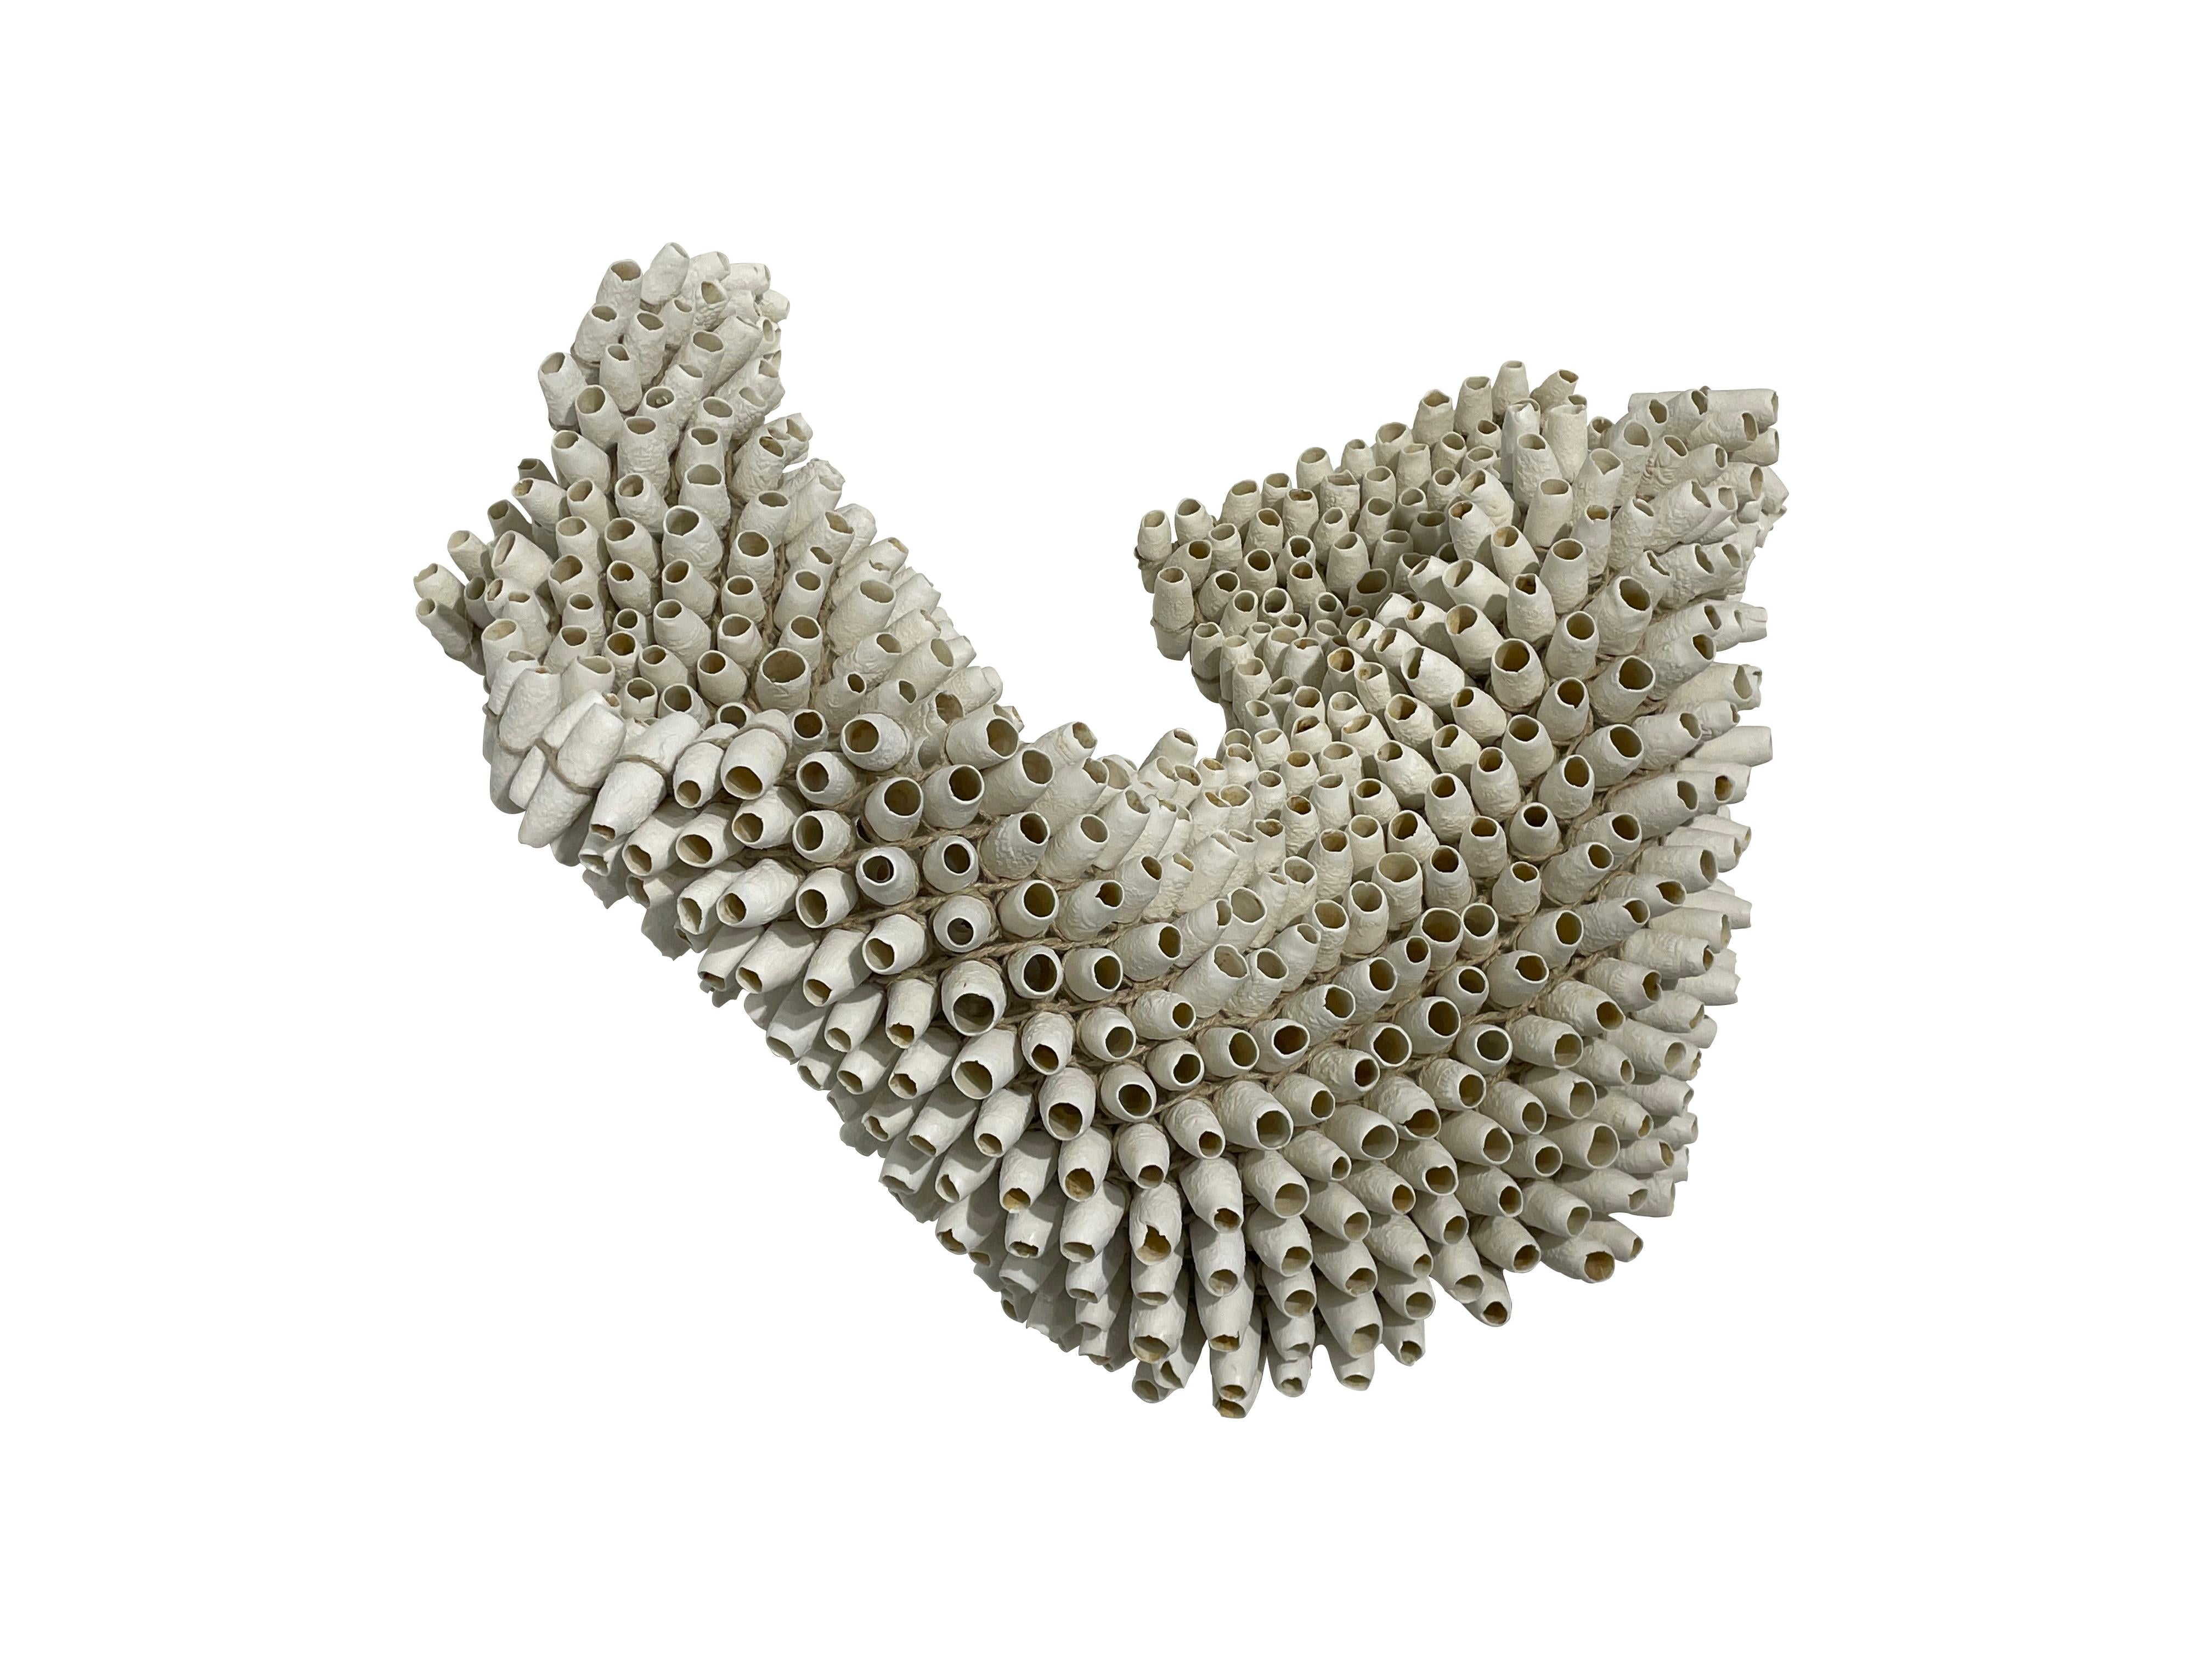 Contemporary French large handmade porcelain tubular sculpture.
Individual porcelain tubular shapes joined together.
Can be arranged in many different lengths and shapes.
Unique and decorative.
